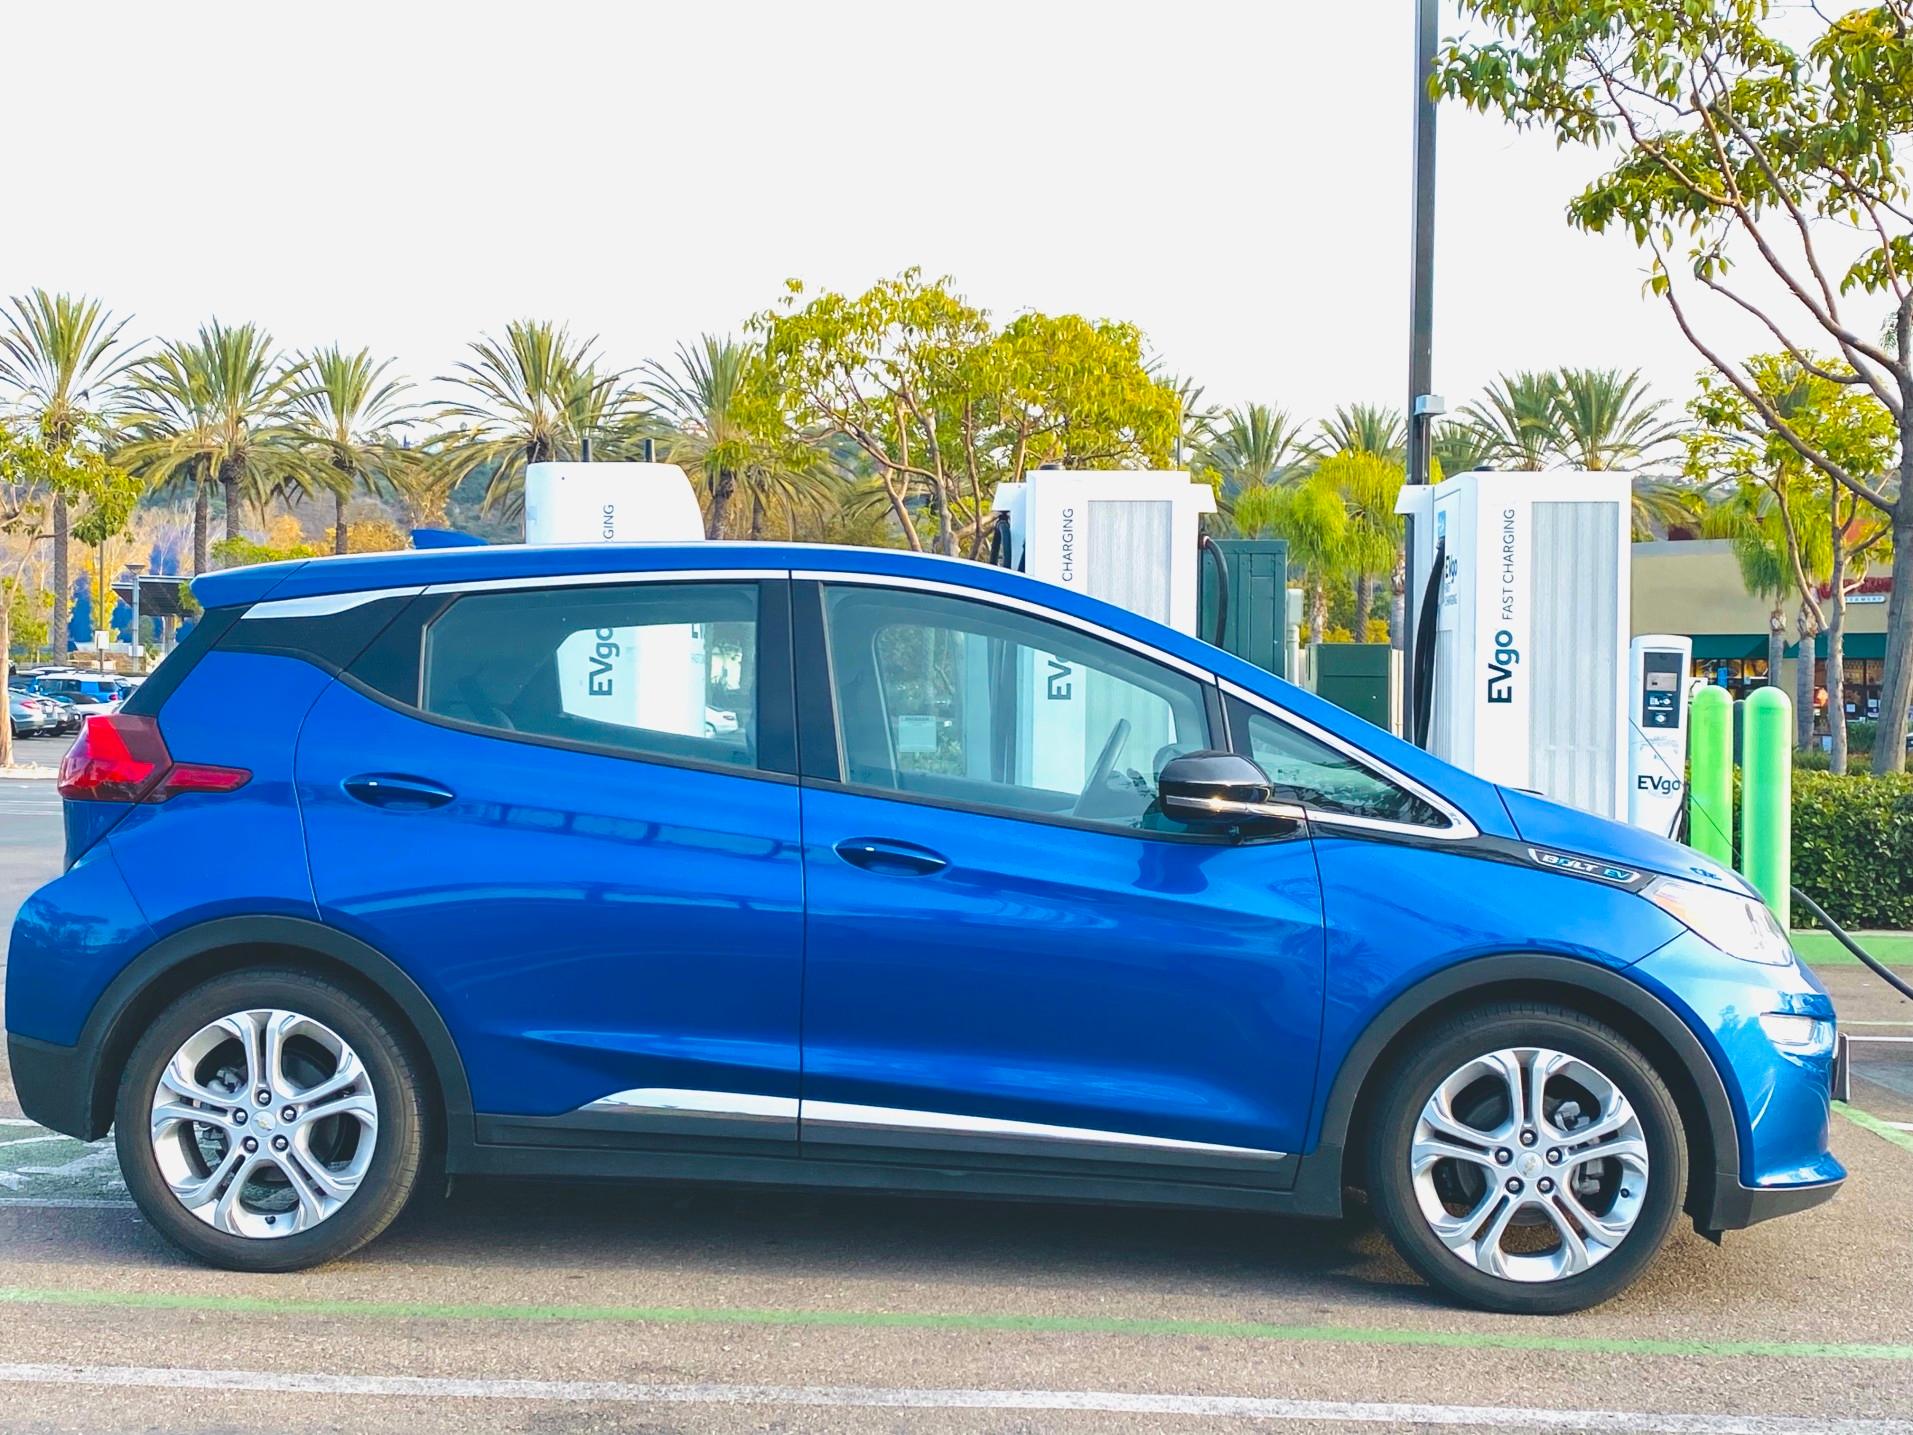 Owners of the Chevy Bolt should be careful with their car